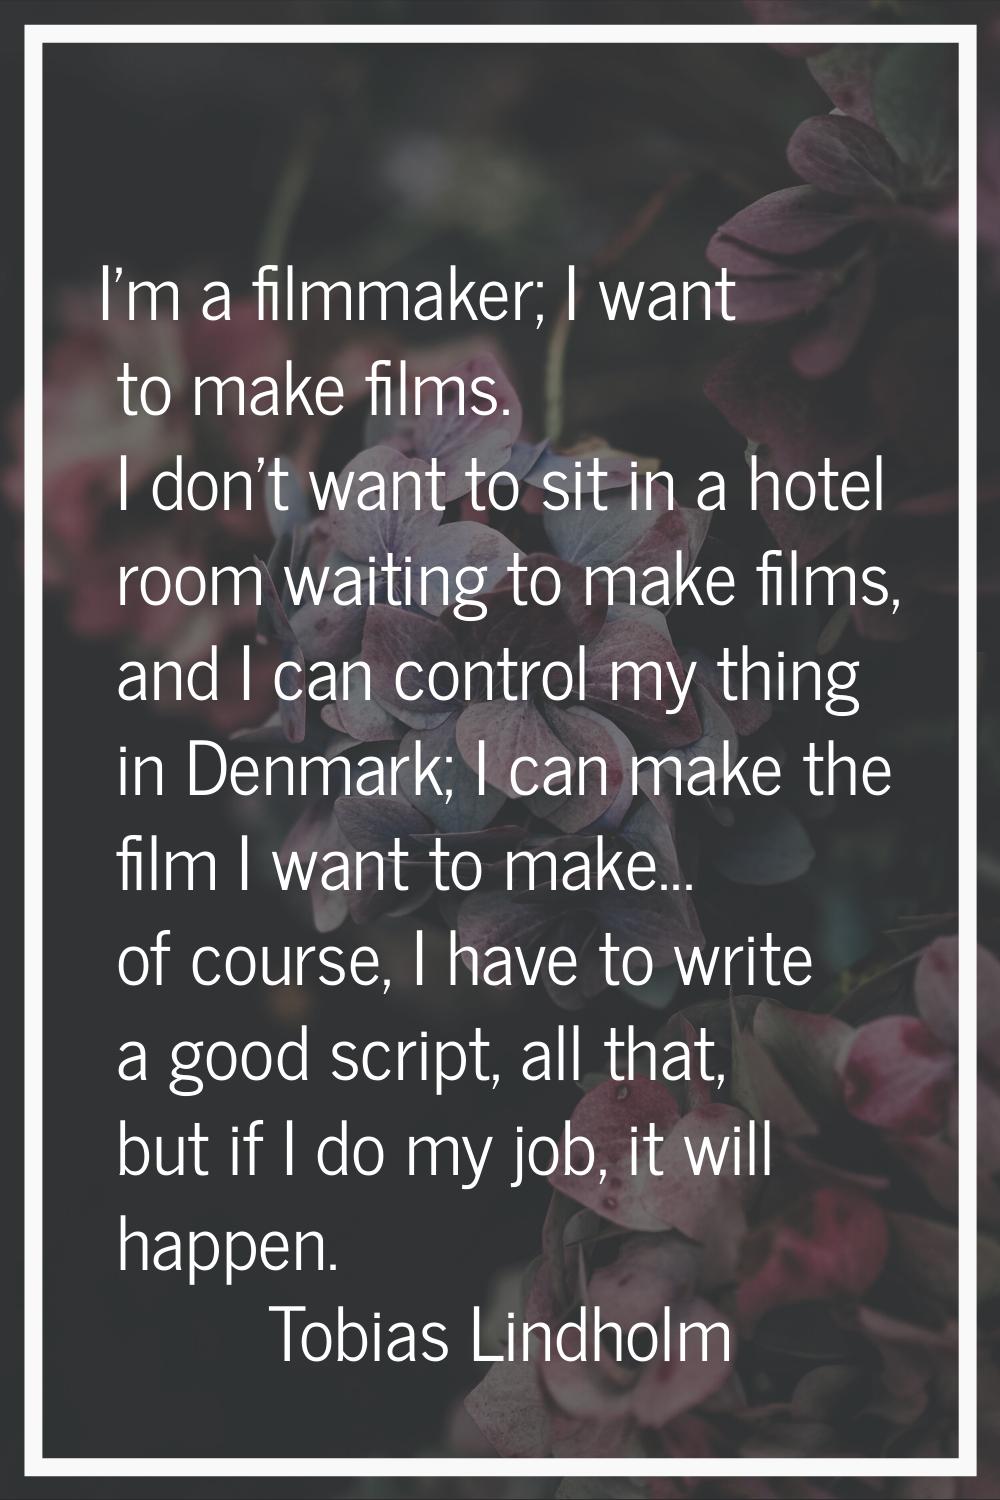 I'm a filmmaker; I want to make films. I don't want to sit in a hotel room waiting to make films, a